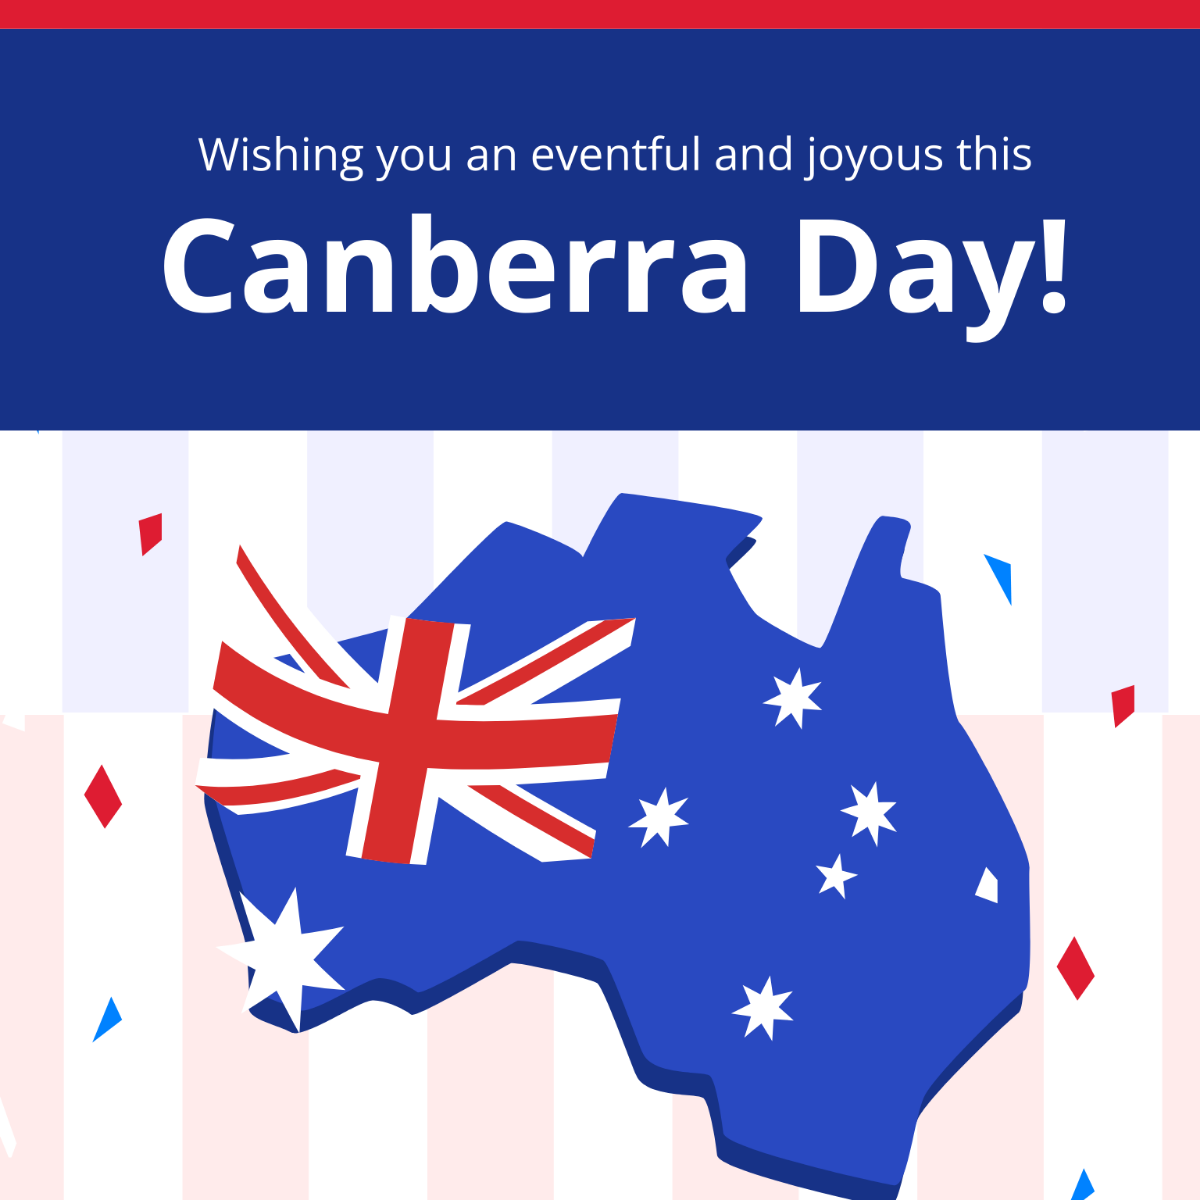 Free Canberra Day Wishes Vector Template